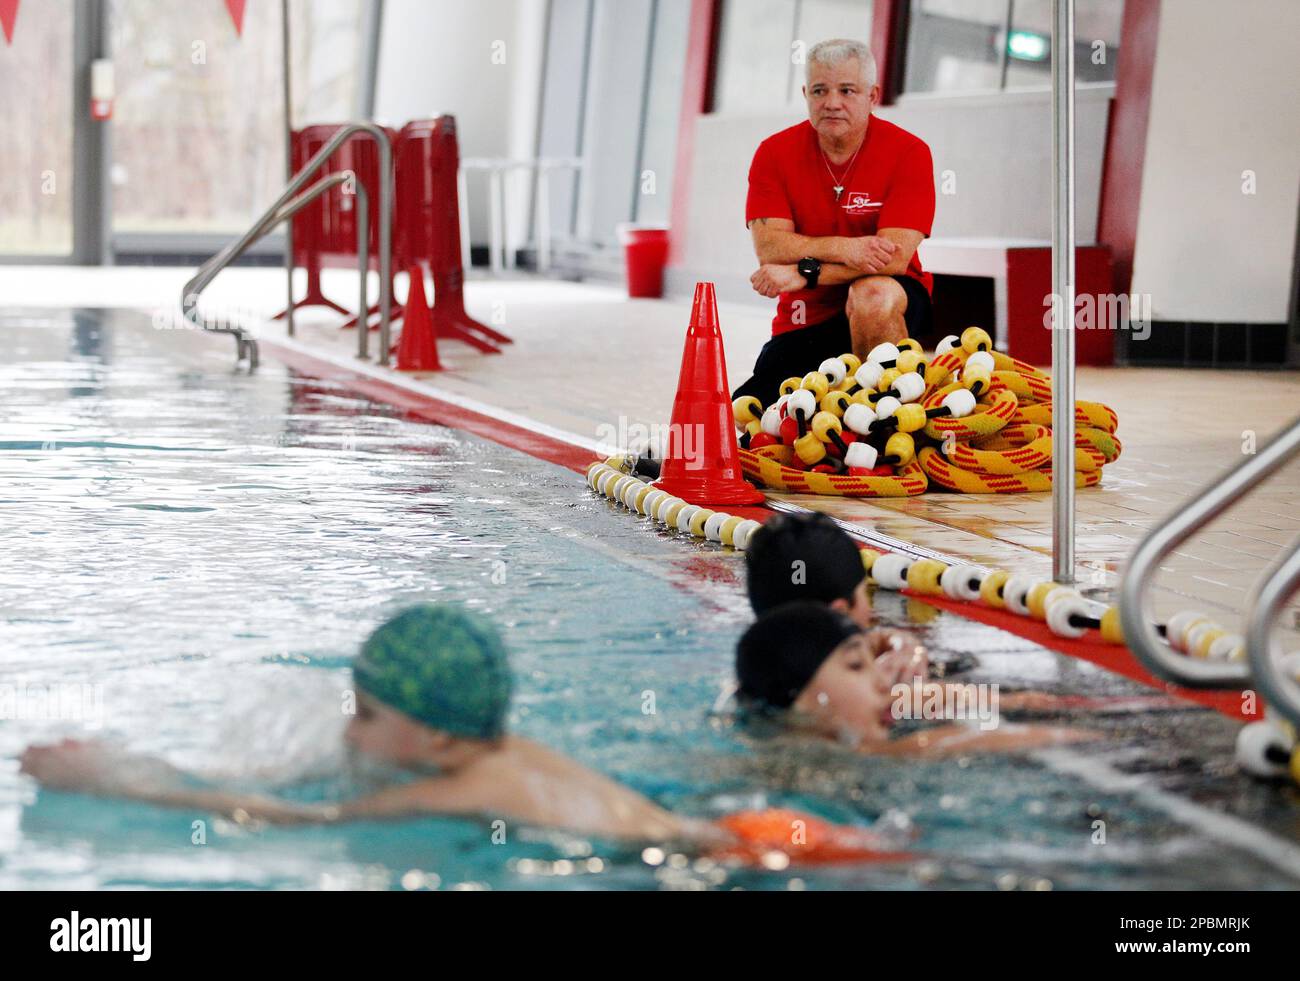 Essen, Germany. 09th Mar, 2023. Swimming supervisor Enrique Gonzalez watches the action in the pool at the Thurmfeld Sports Pool. The pools are looking for staff for the outdoor pool season. If the required 50 lifeguards are missing in the summer, many outdoor pools could remain closed. (to dpa: 'When the lifeguard is missing - outdoor pools are looking for staff for the summer') Credit: Roland Weihrauch/dpa/Alamy Live News Stock Photo